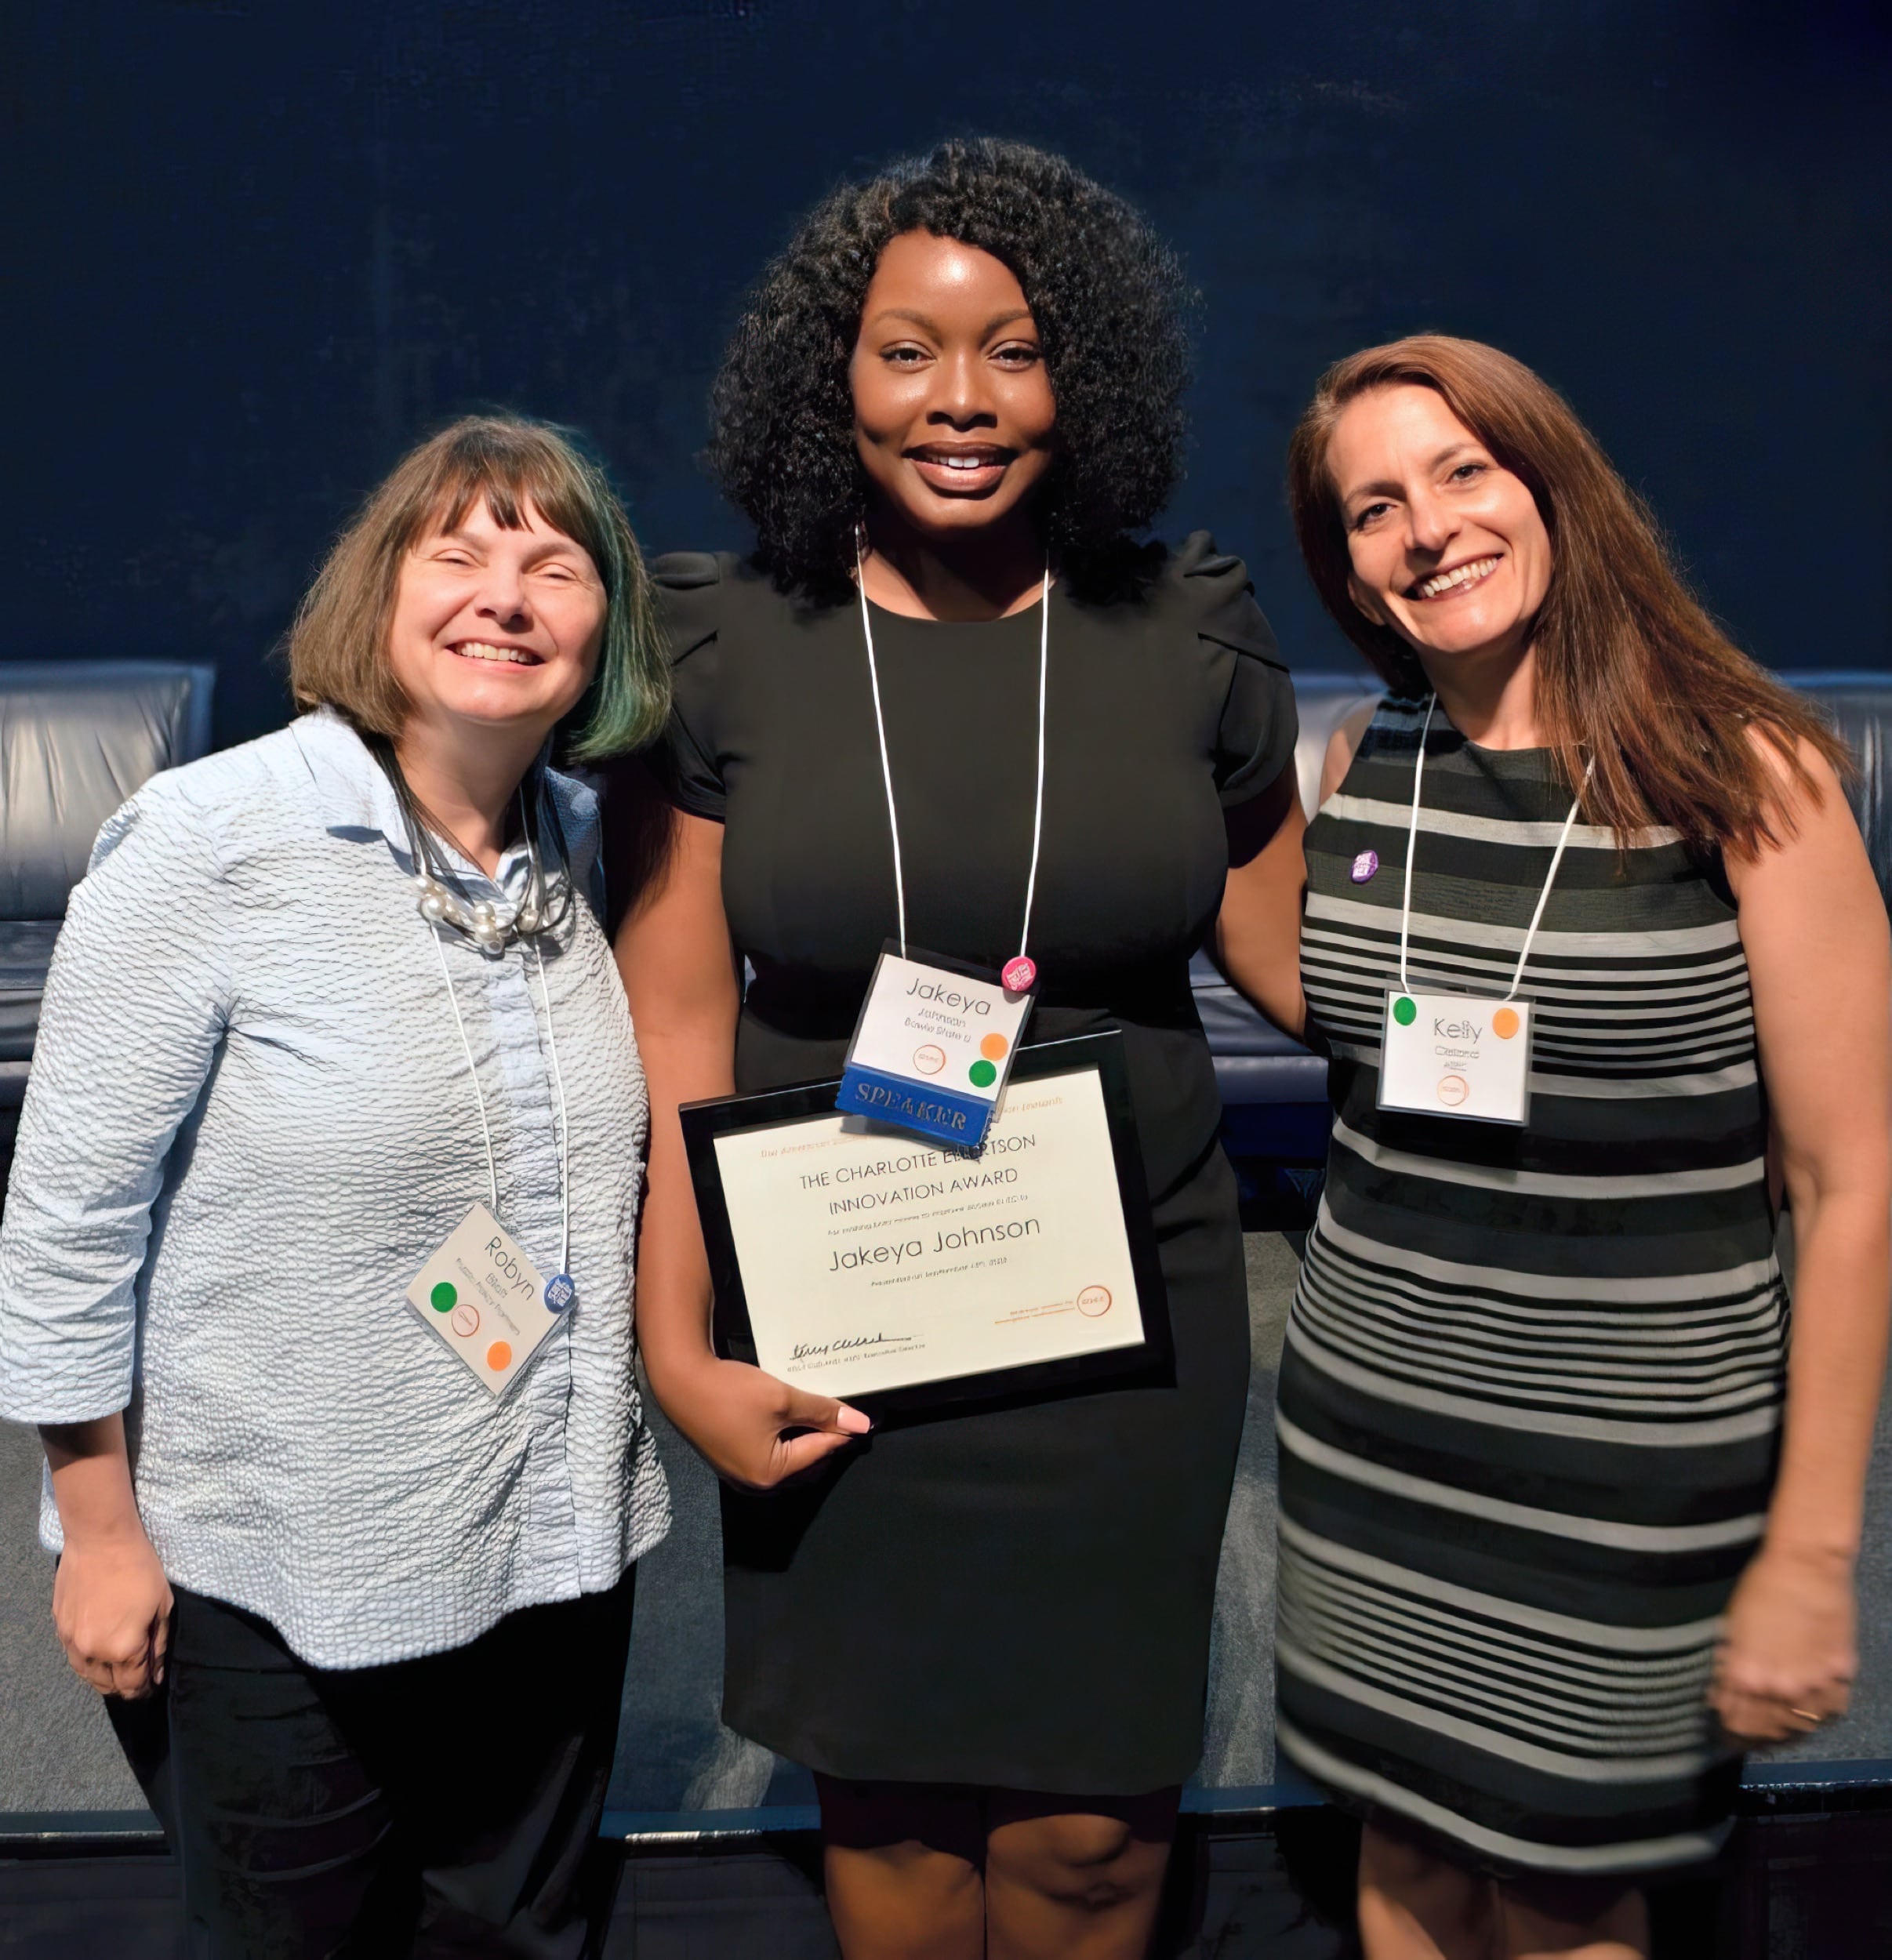 akeya Johnson, a Black woman, receives an innovation award from the Society for Emergency Contraception for her work in improving access to emergency contraception.